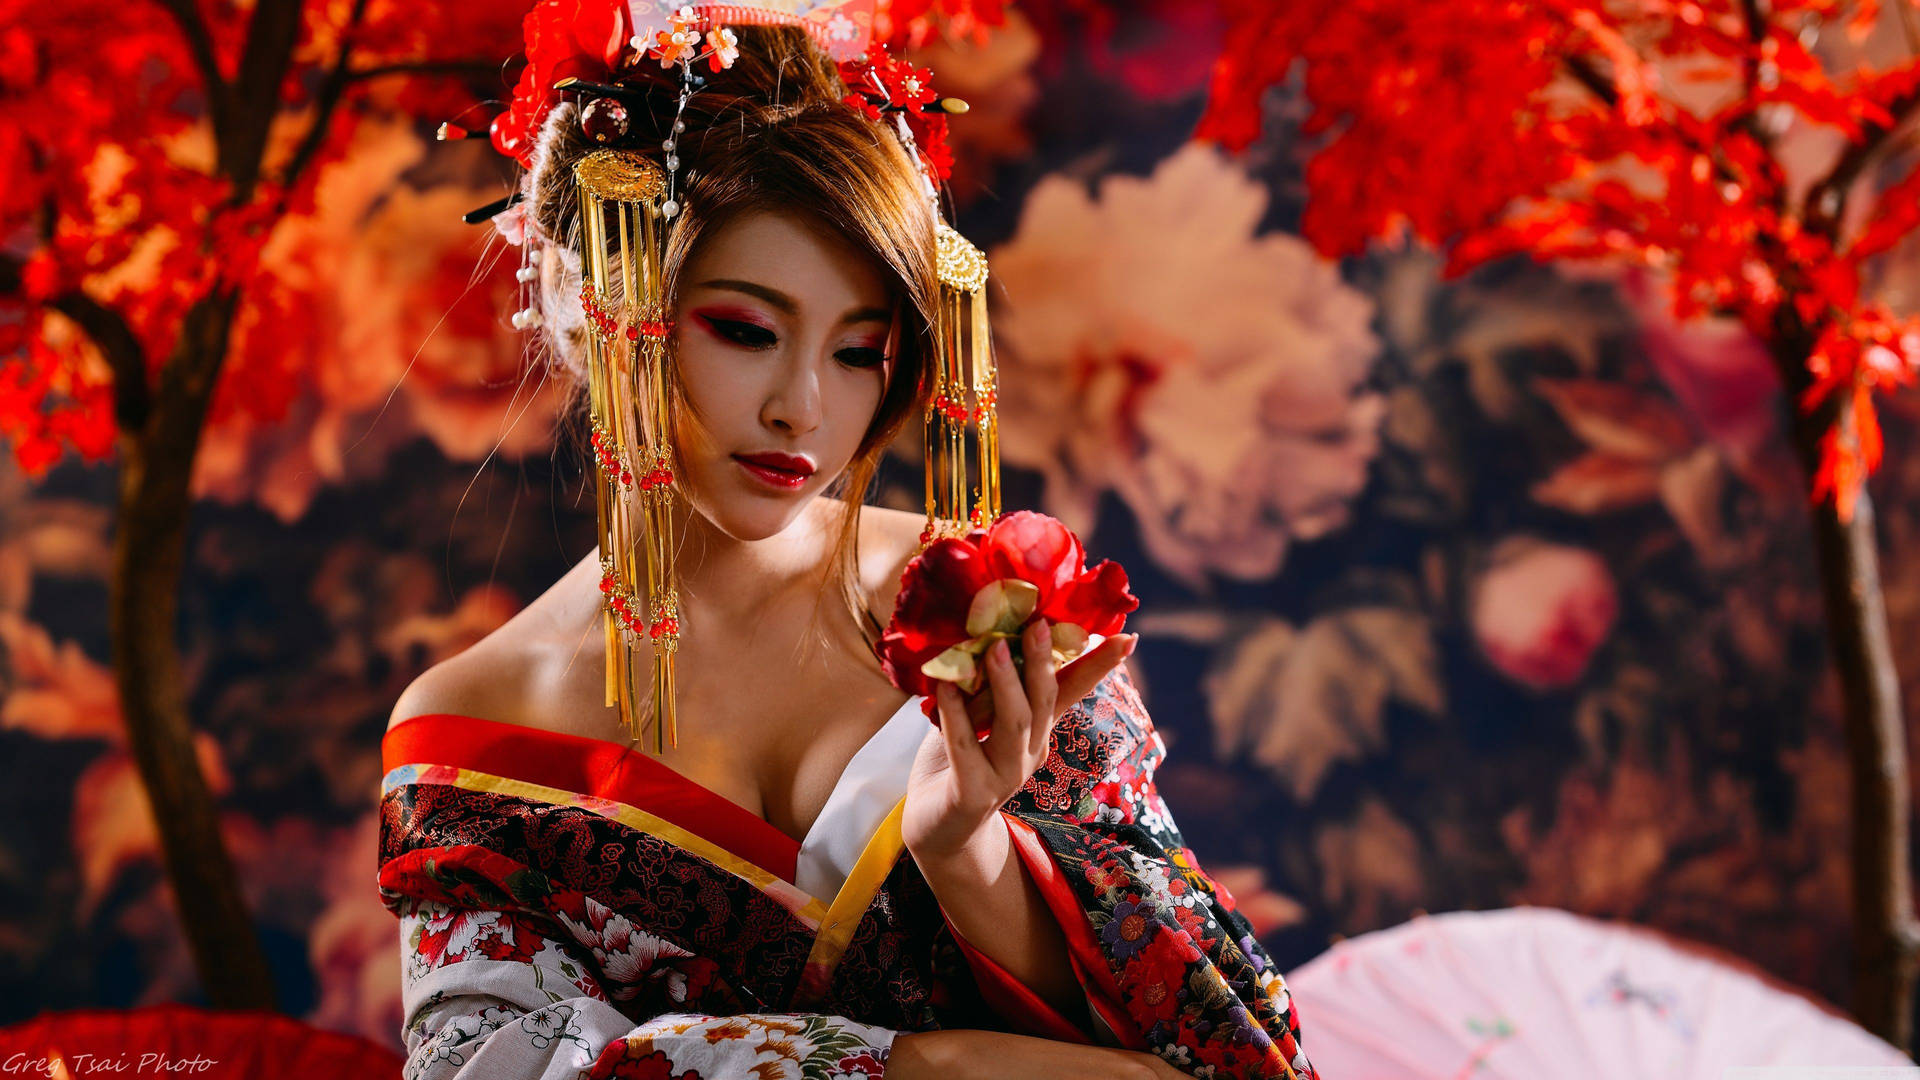 Download Japanese Girl With Red Flower Wallpaper 